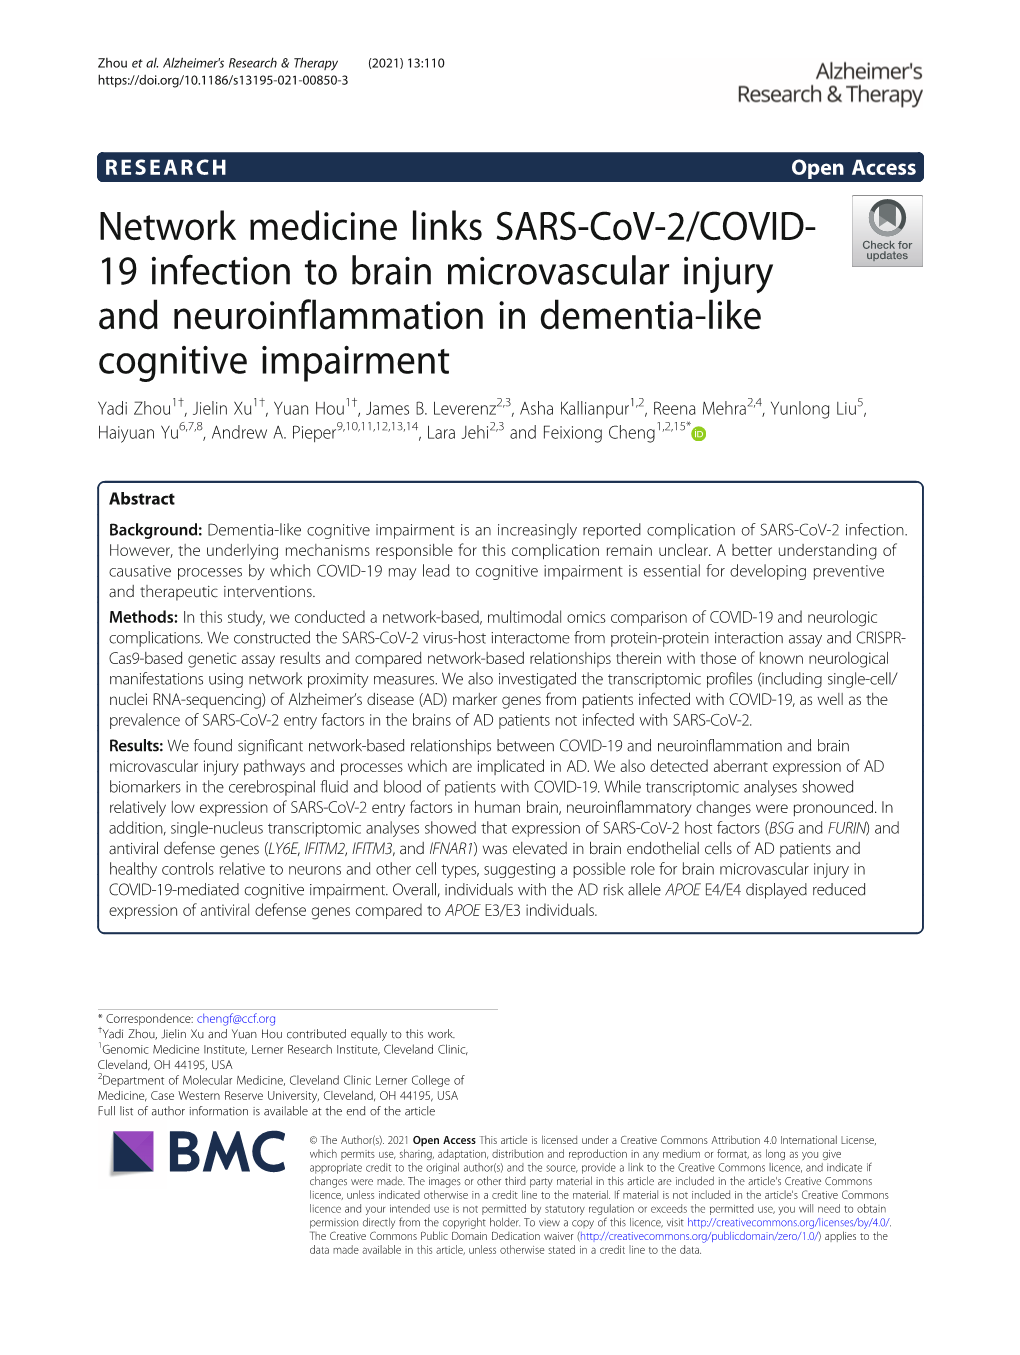 Network Medicine Links SARS-Cov-2/COVID-19 Infection To